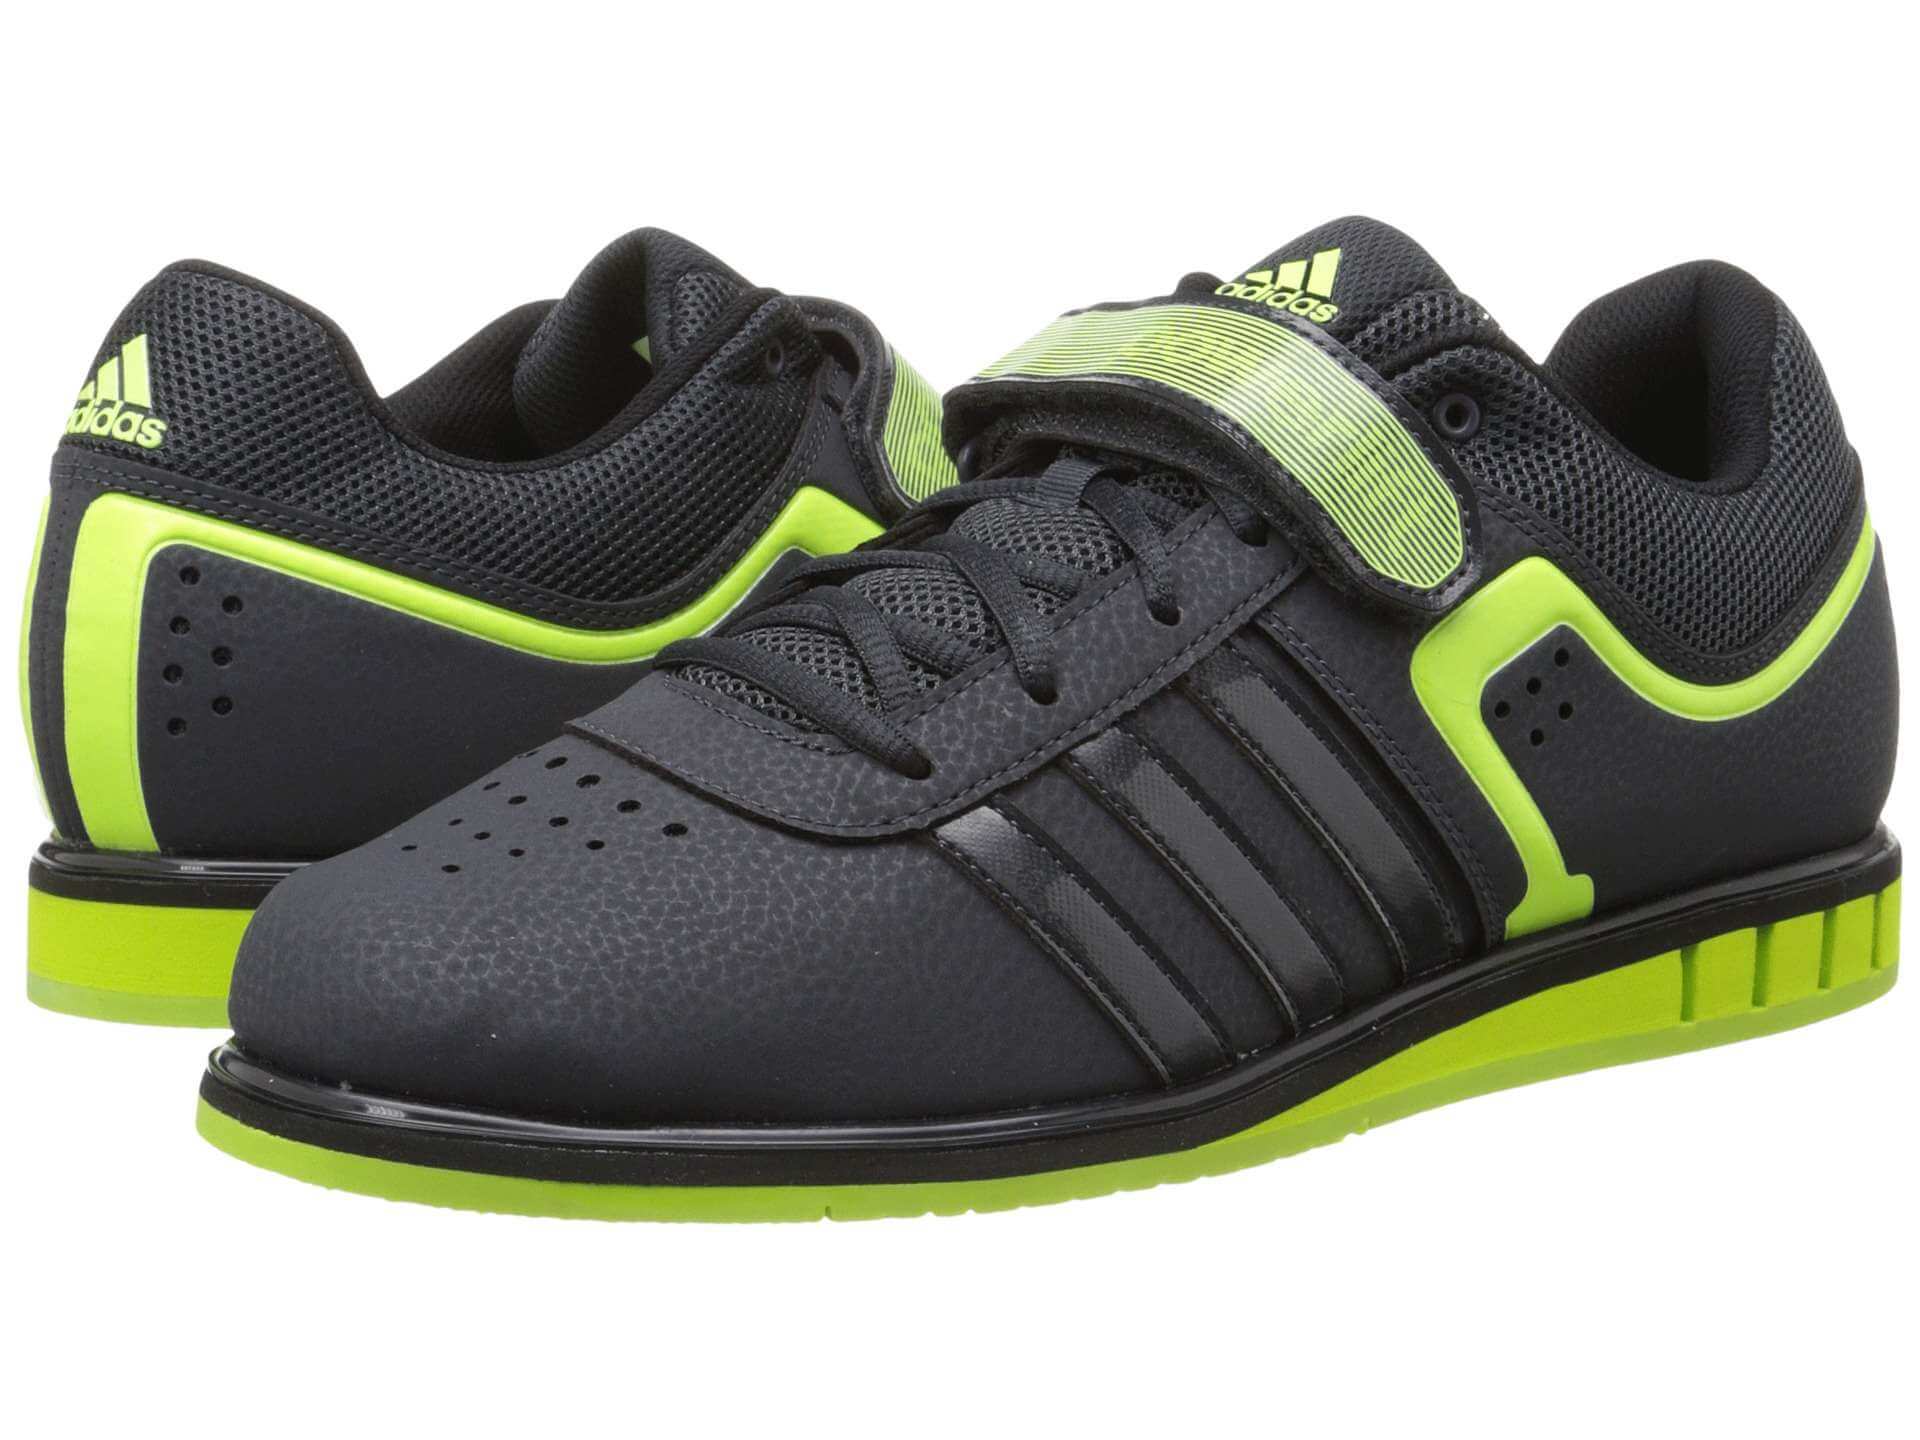 The Top 4 Best Weightlifting Shoes With Reviews - Weight Lifting Footwear